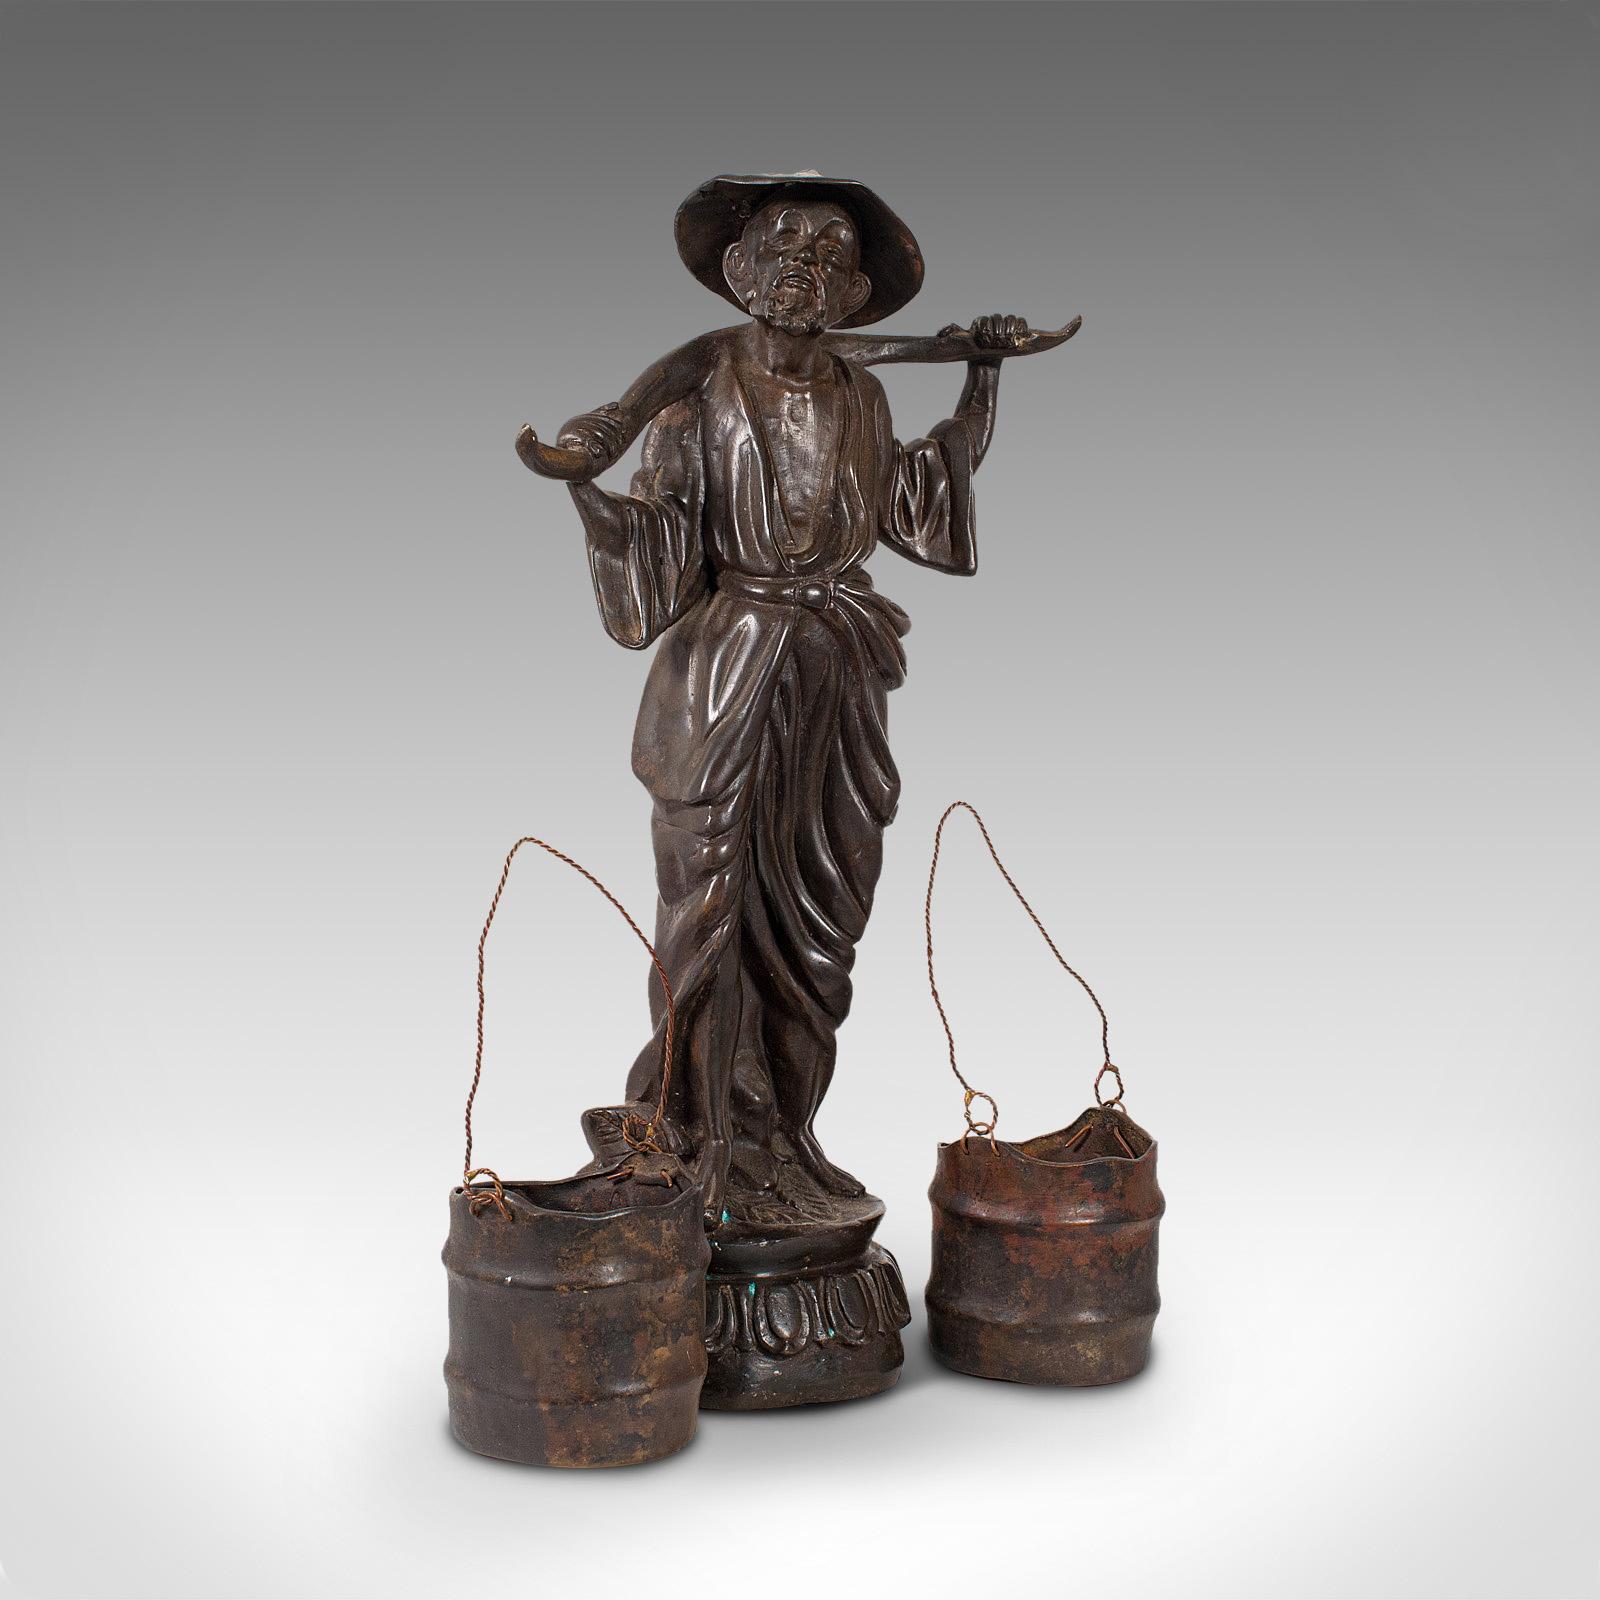 19th Century Tall Antique Decorative Figure, Chinese, Bronze, Statue, Water Carrier For Sale